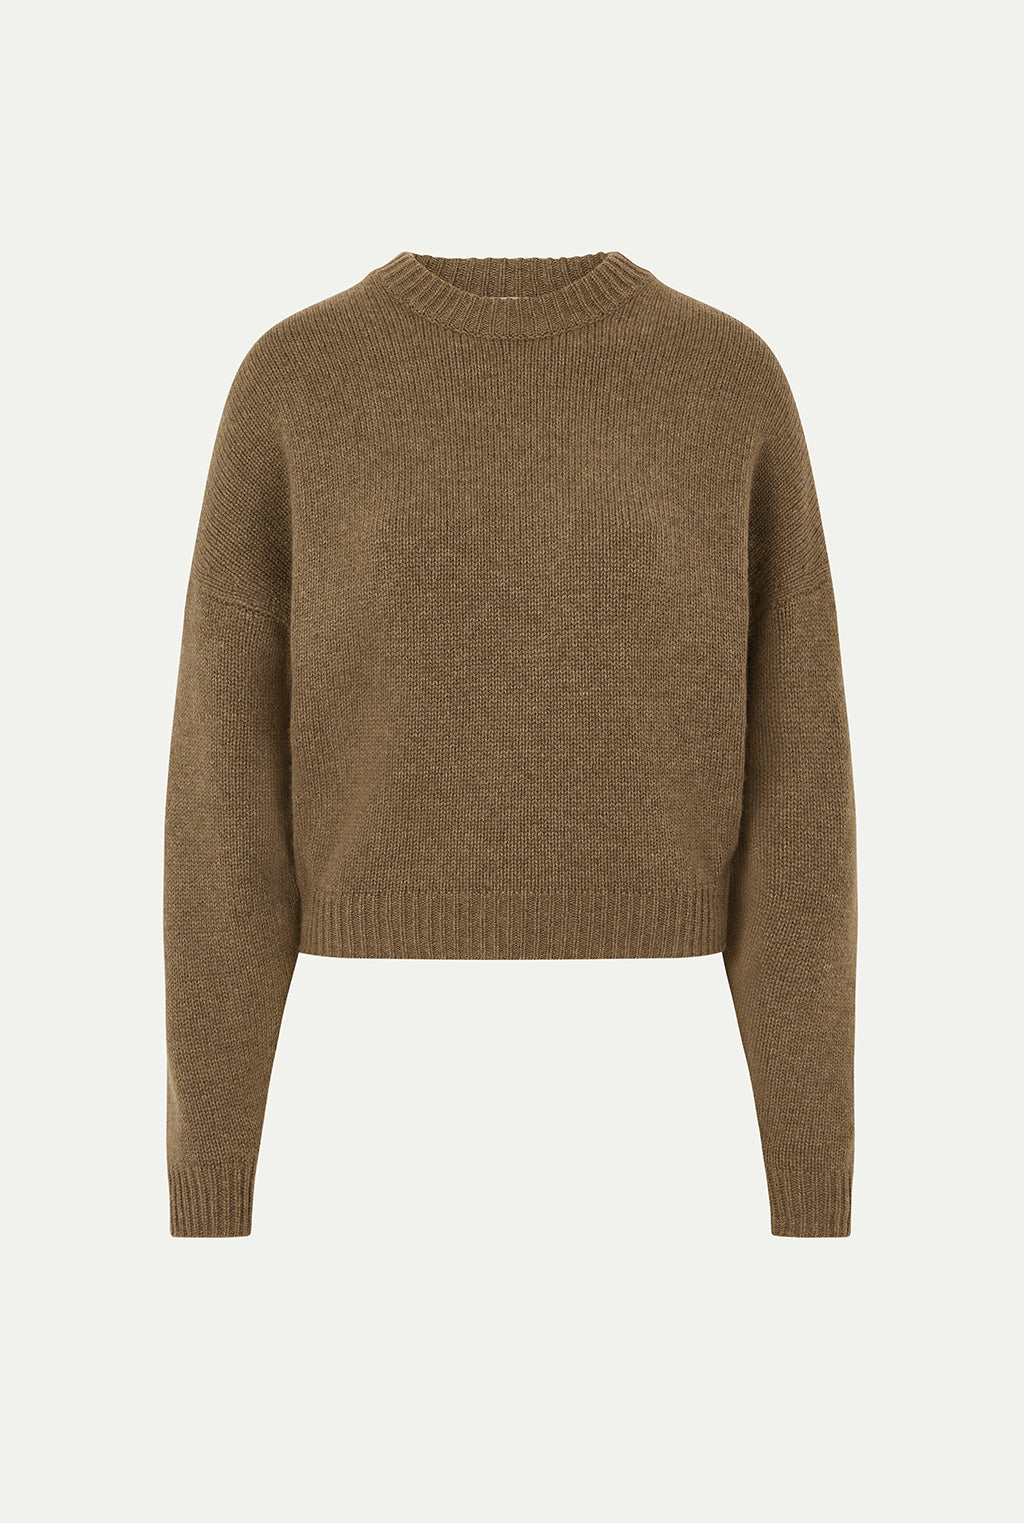 ANONG cashmere sweater